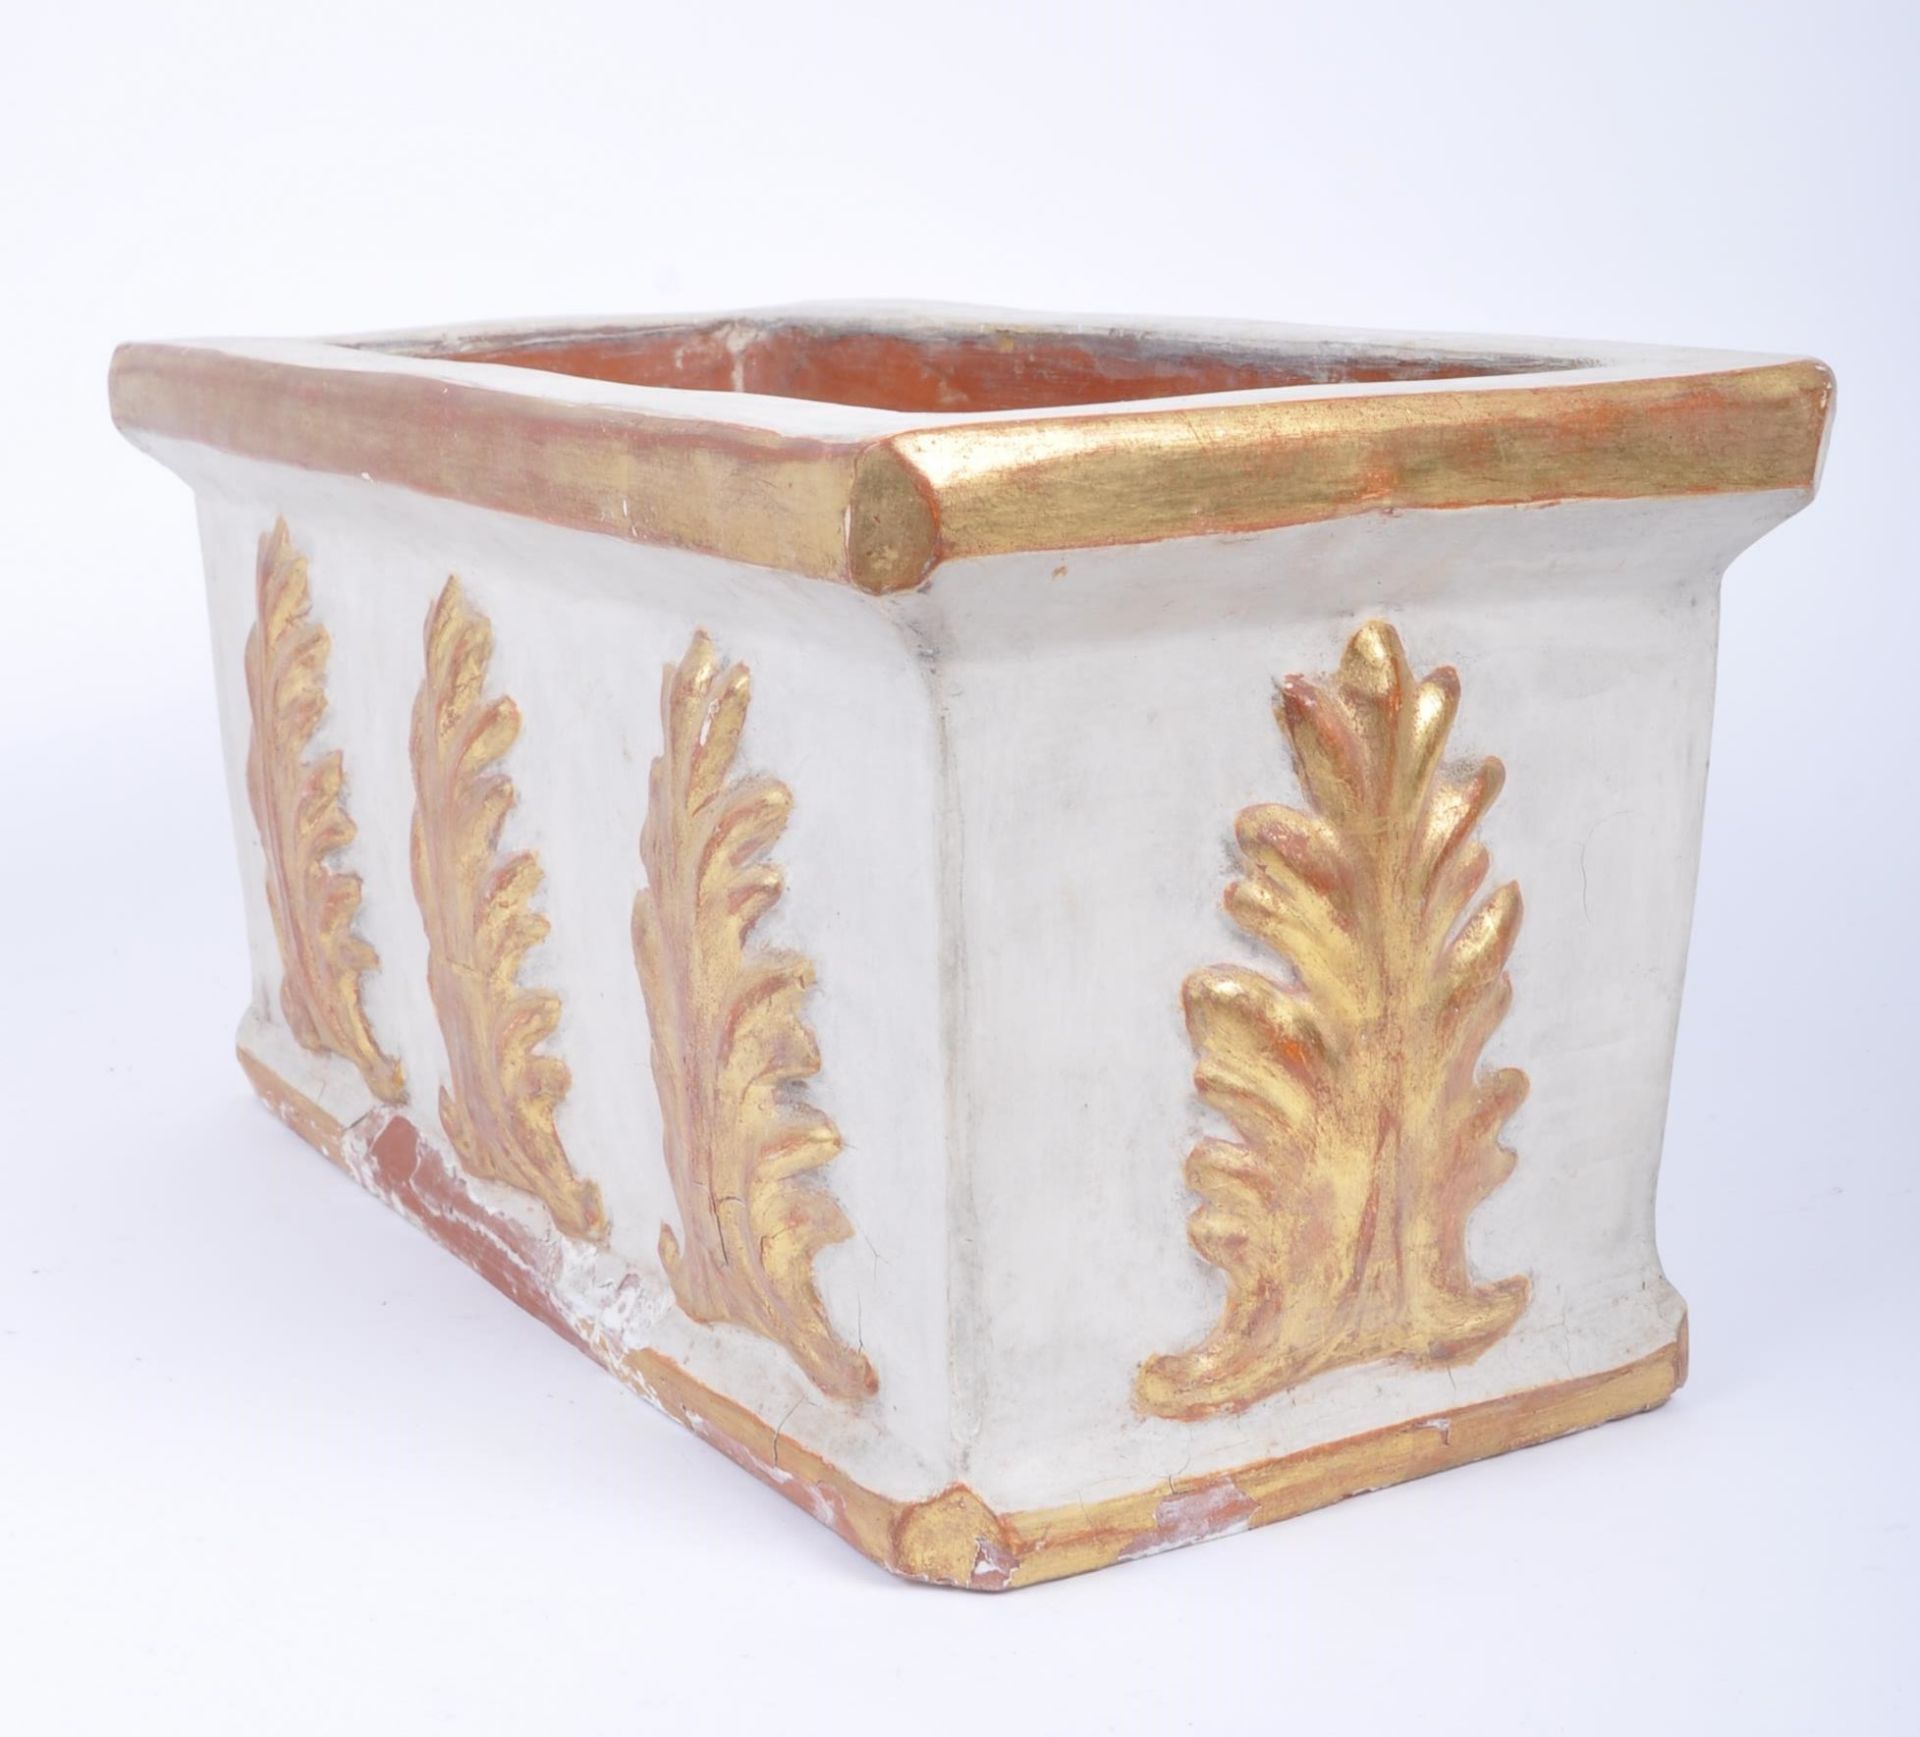 MIDCENTURY NEOCLASSICAL GILDED TERRACOTTA PLANTER - Image 6 of 6